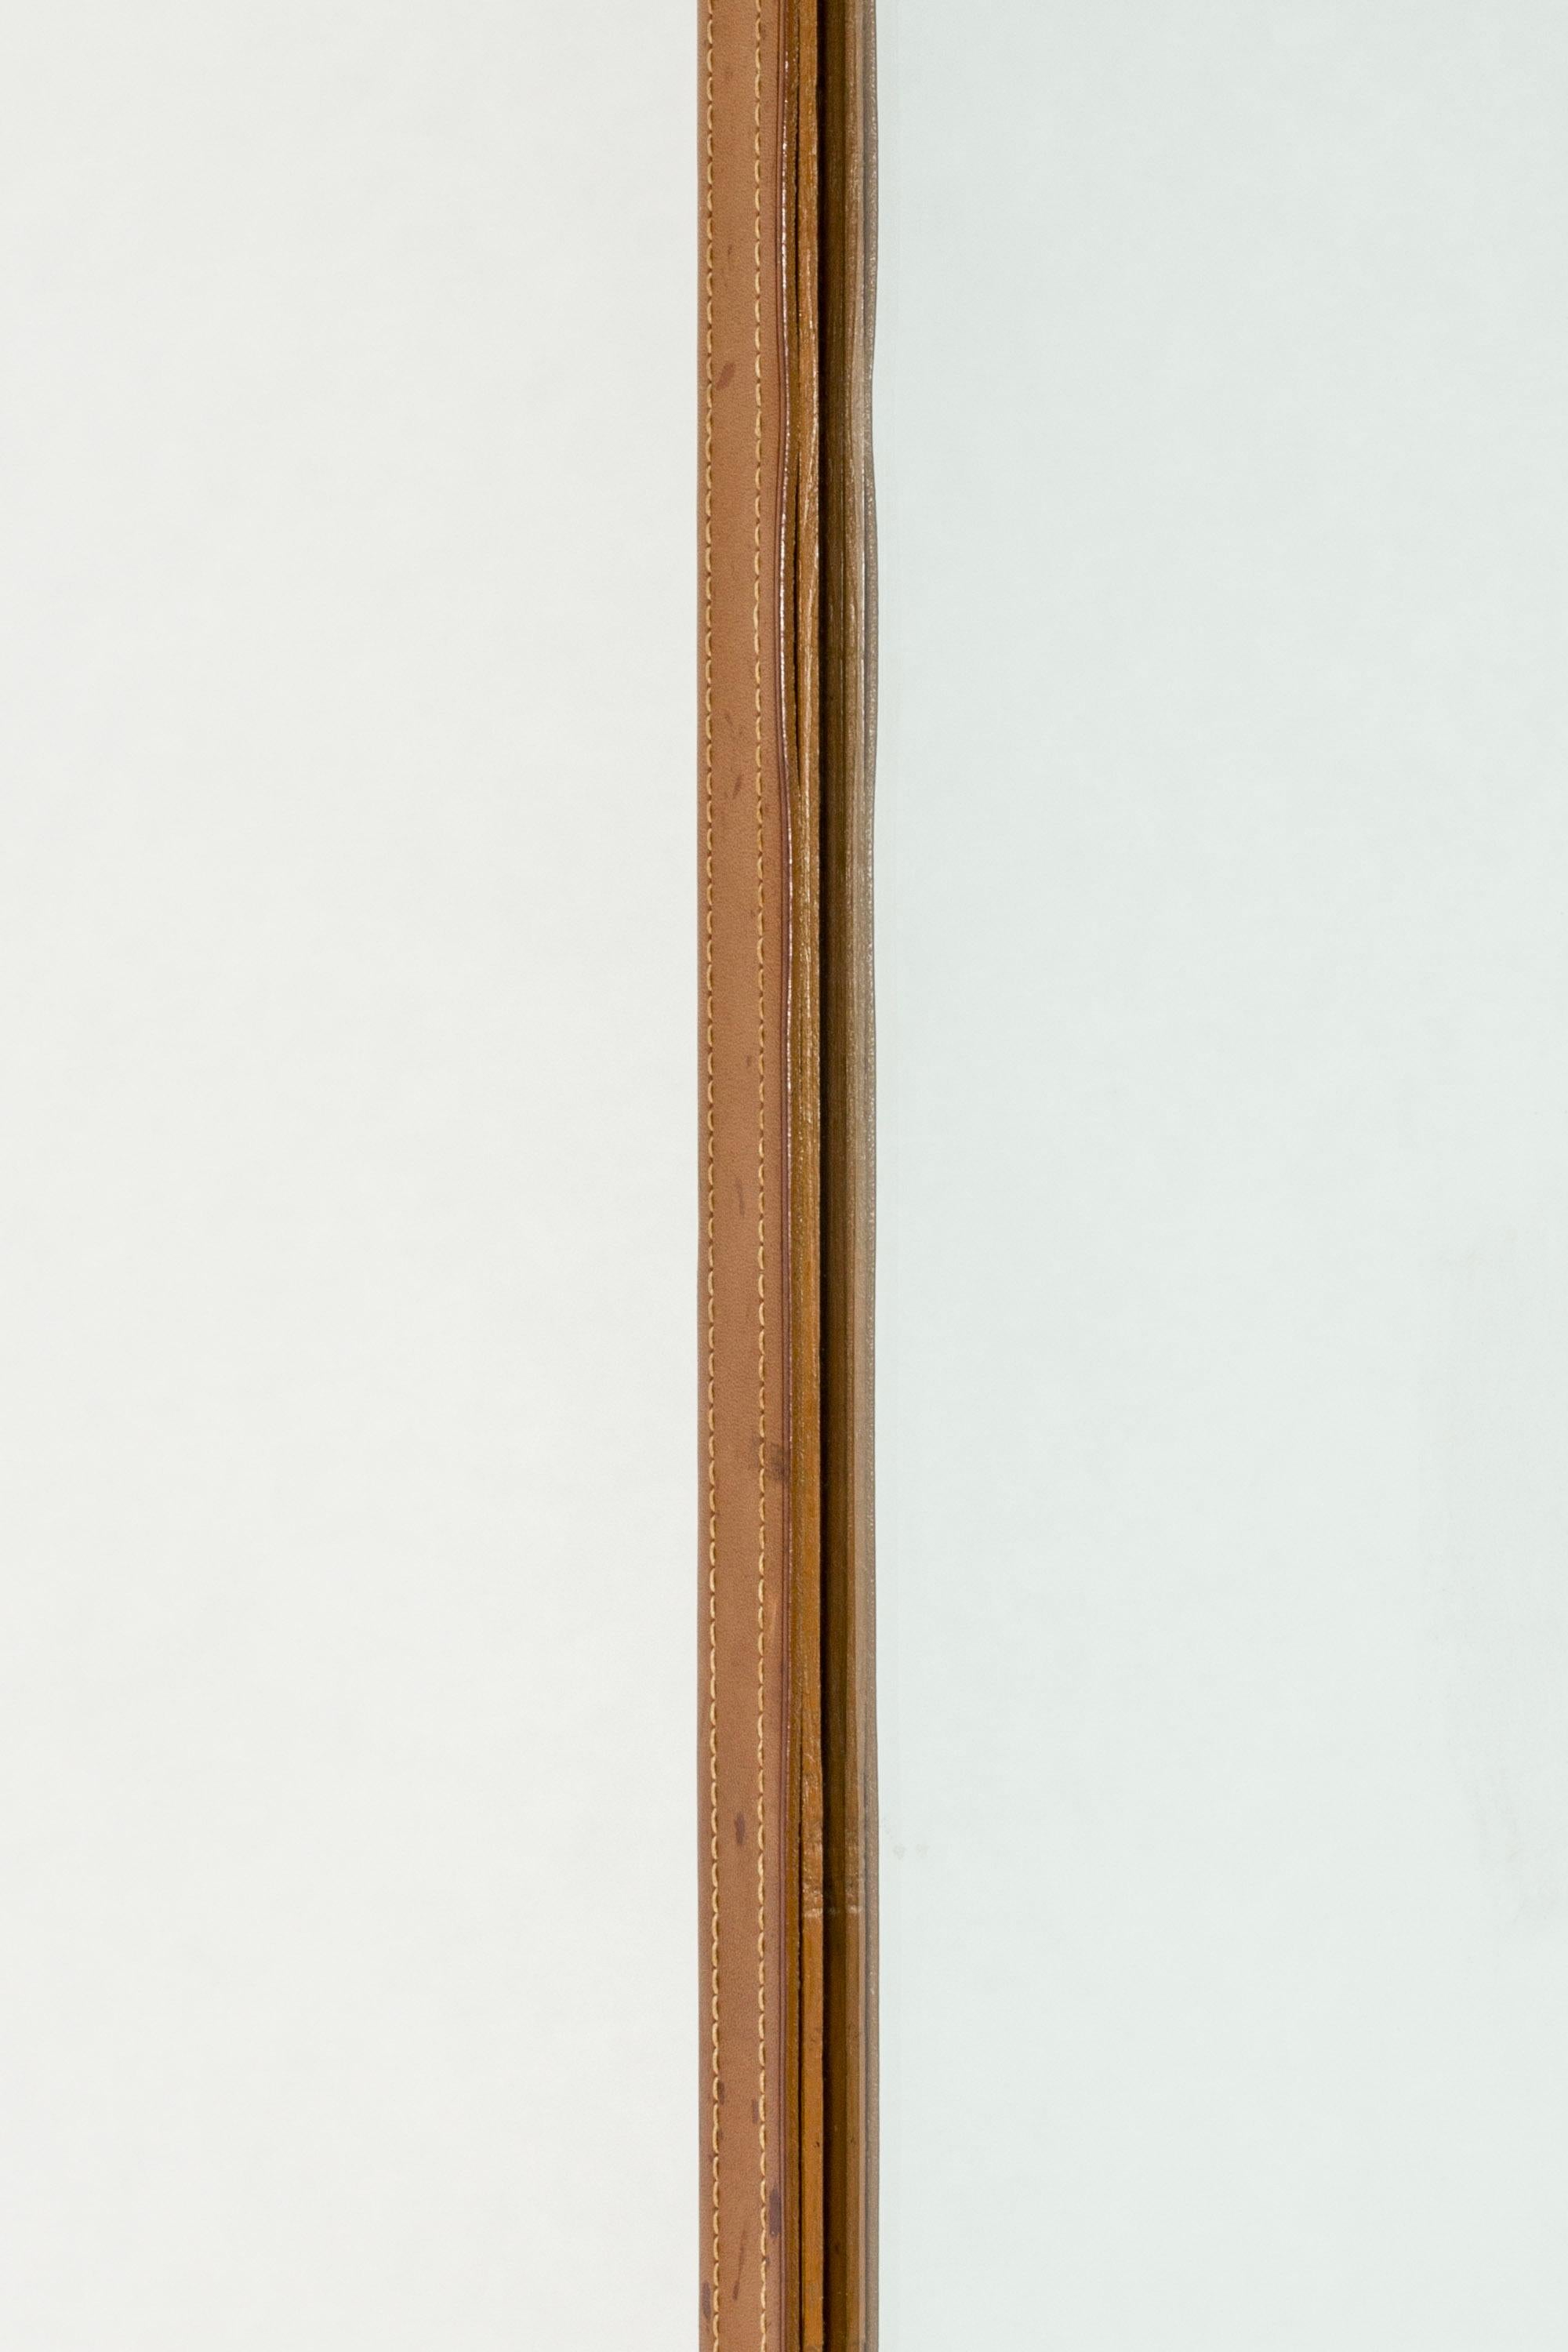 Mid-20th Century Midcentury wall mirror with leather frame, NK, Sweden, 1946